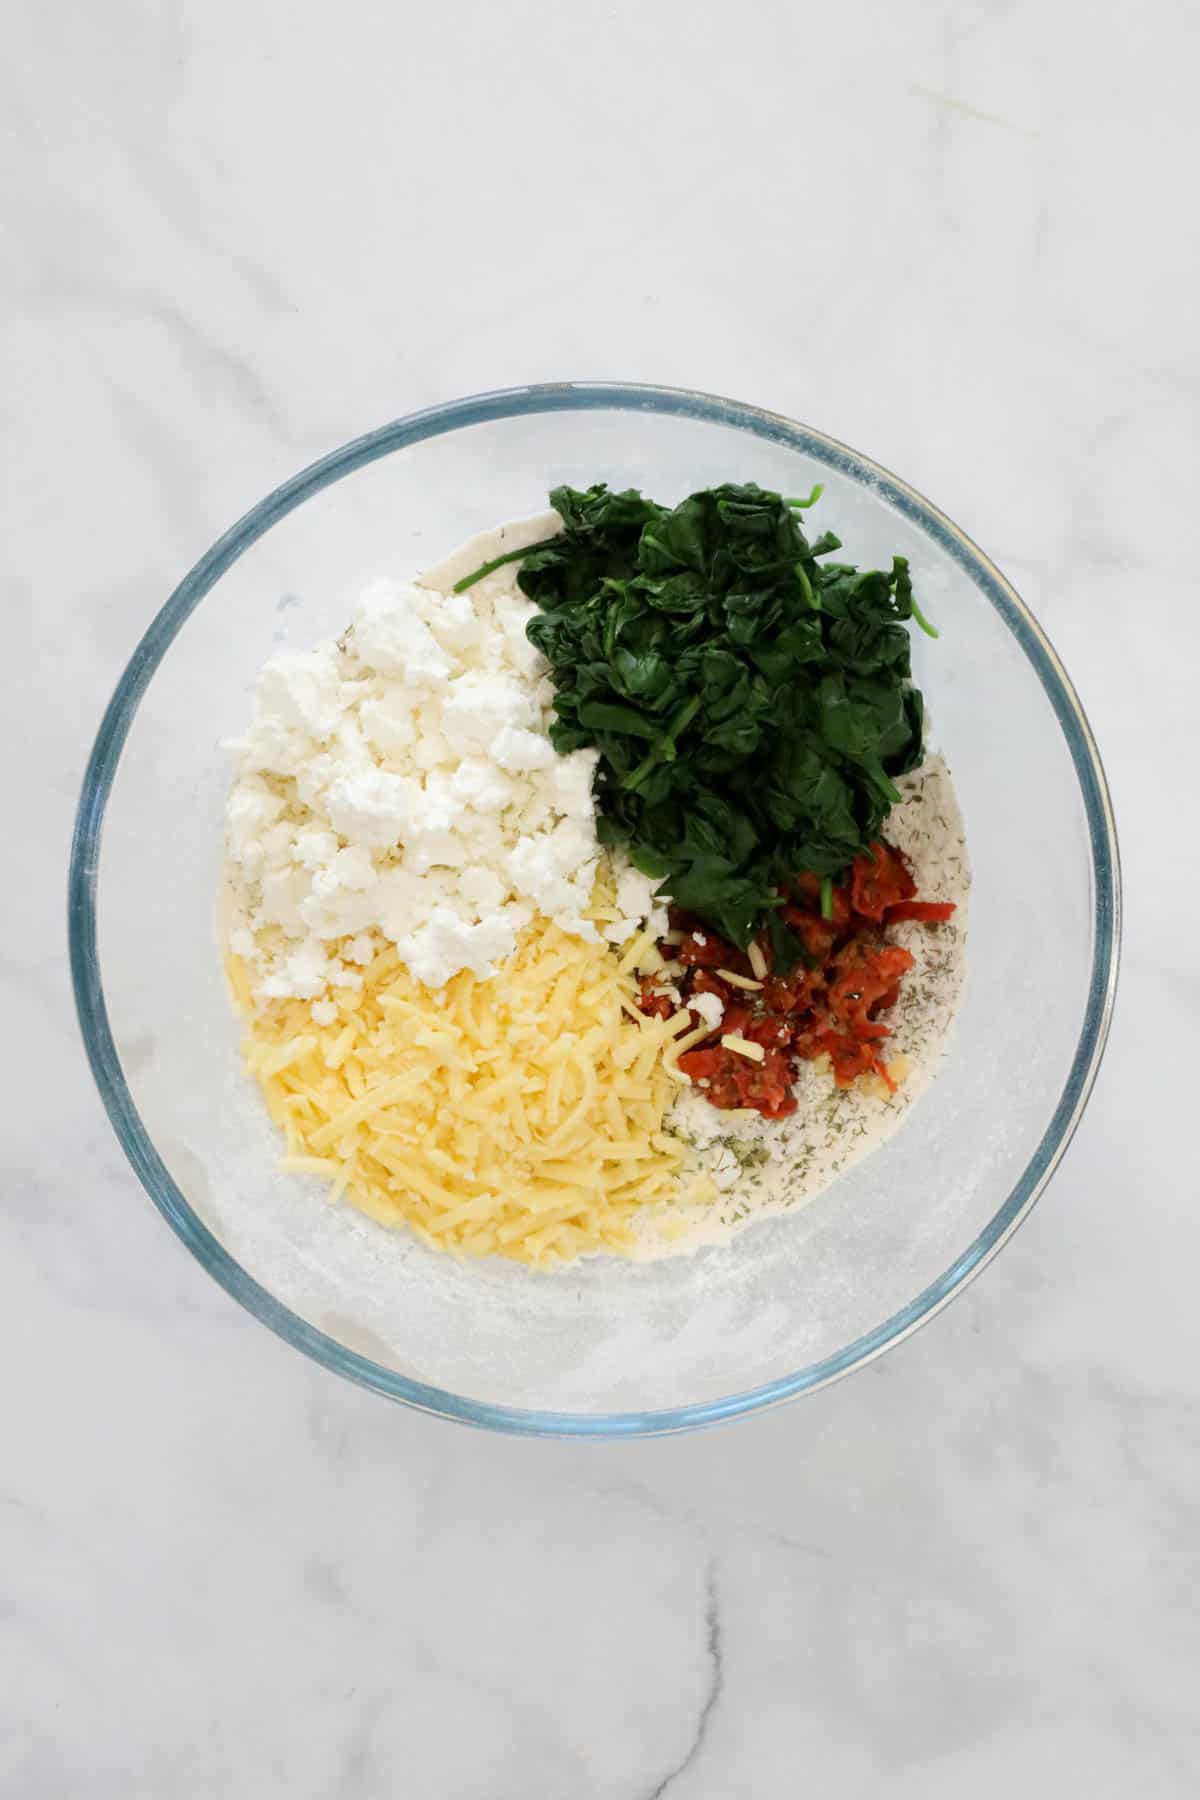 Drained spinach, feta cheese, grated cheese and sun dried tomatoes added to the flour in the mixing bowl.